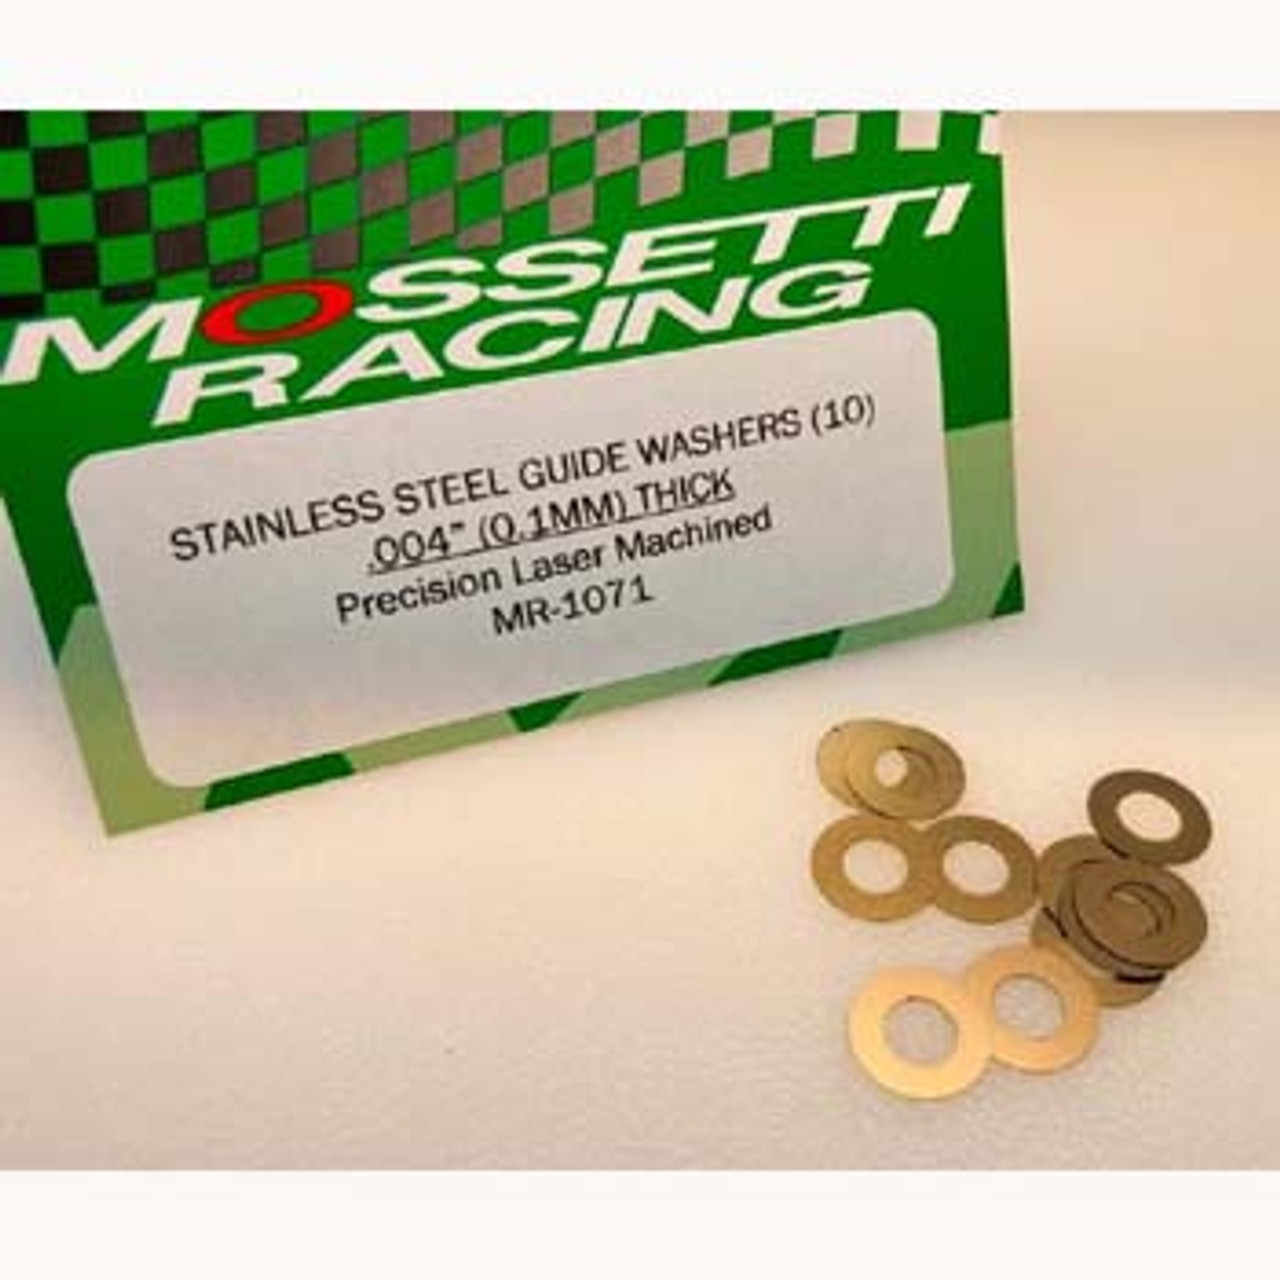 MOSSETTI PRECISION STAINLESS STEEL GUIDE WASHERS (10) .OO4" THICK MR1071